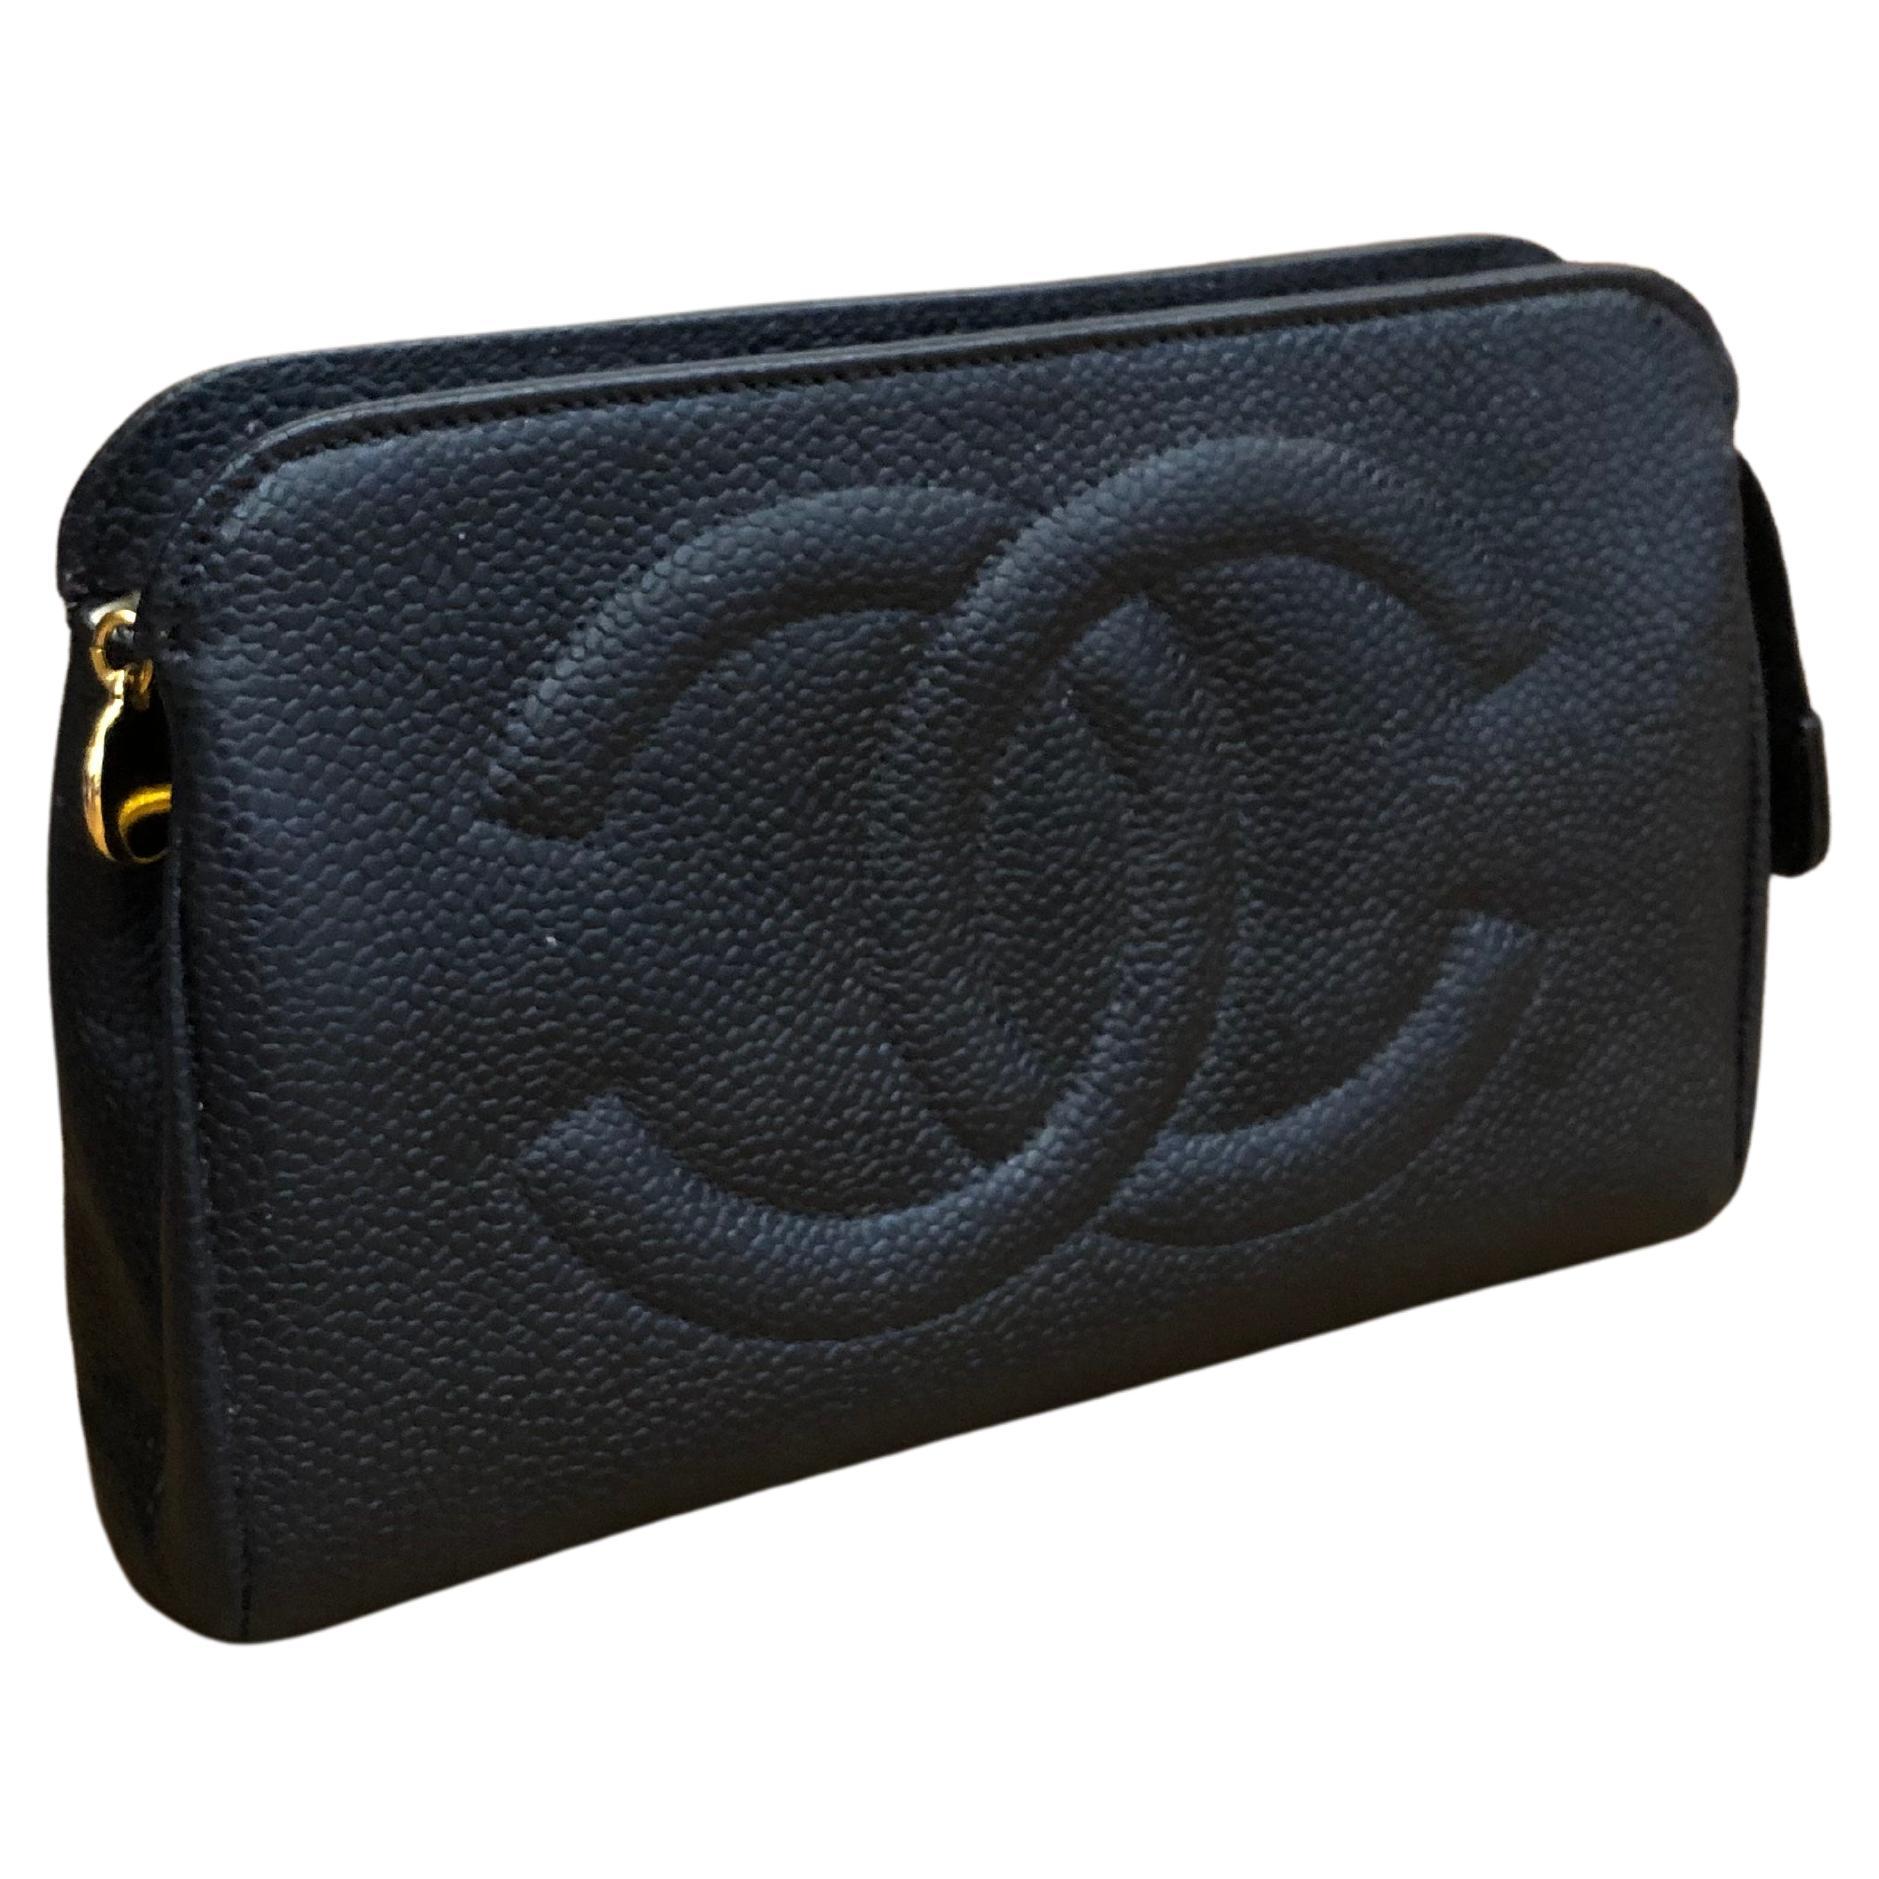 Vintage CHANEL Black Caviar Leather Pouch Bag Clutch (Altered)